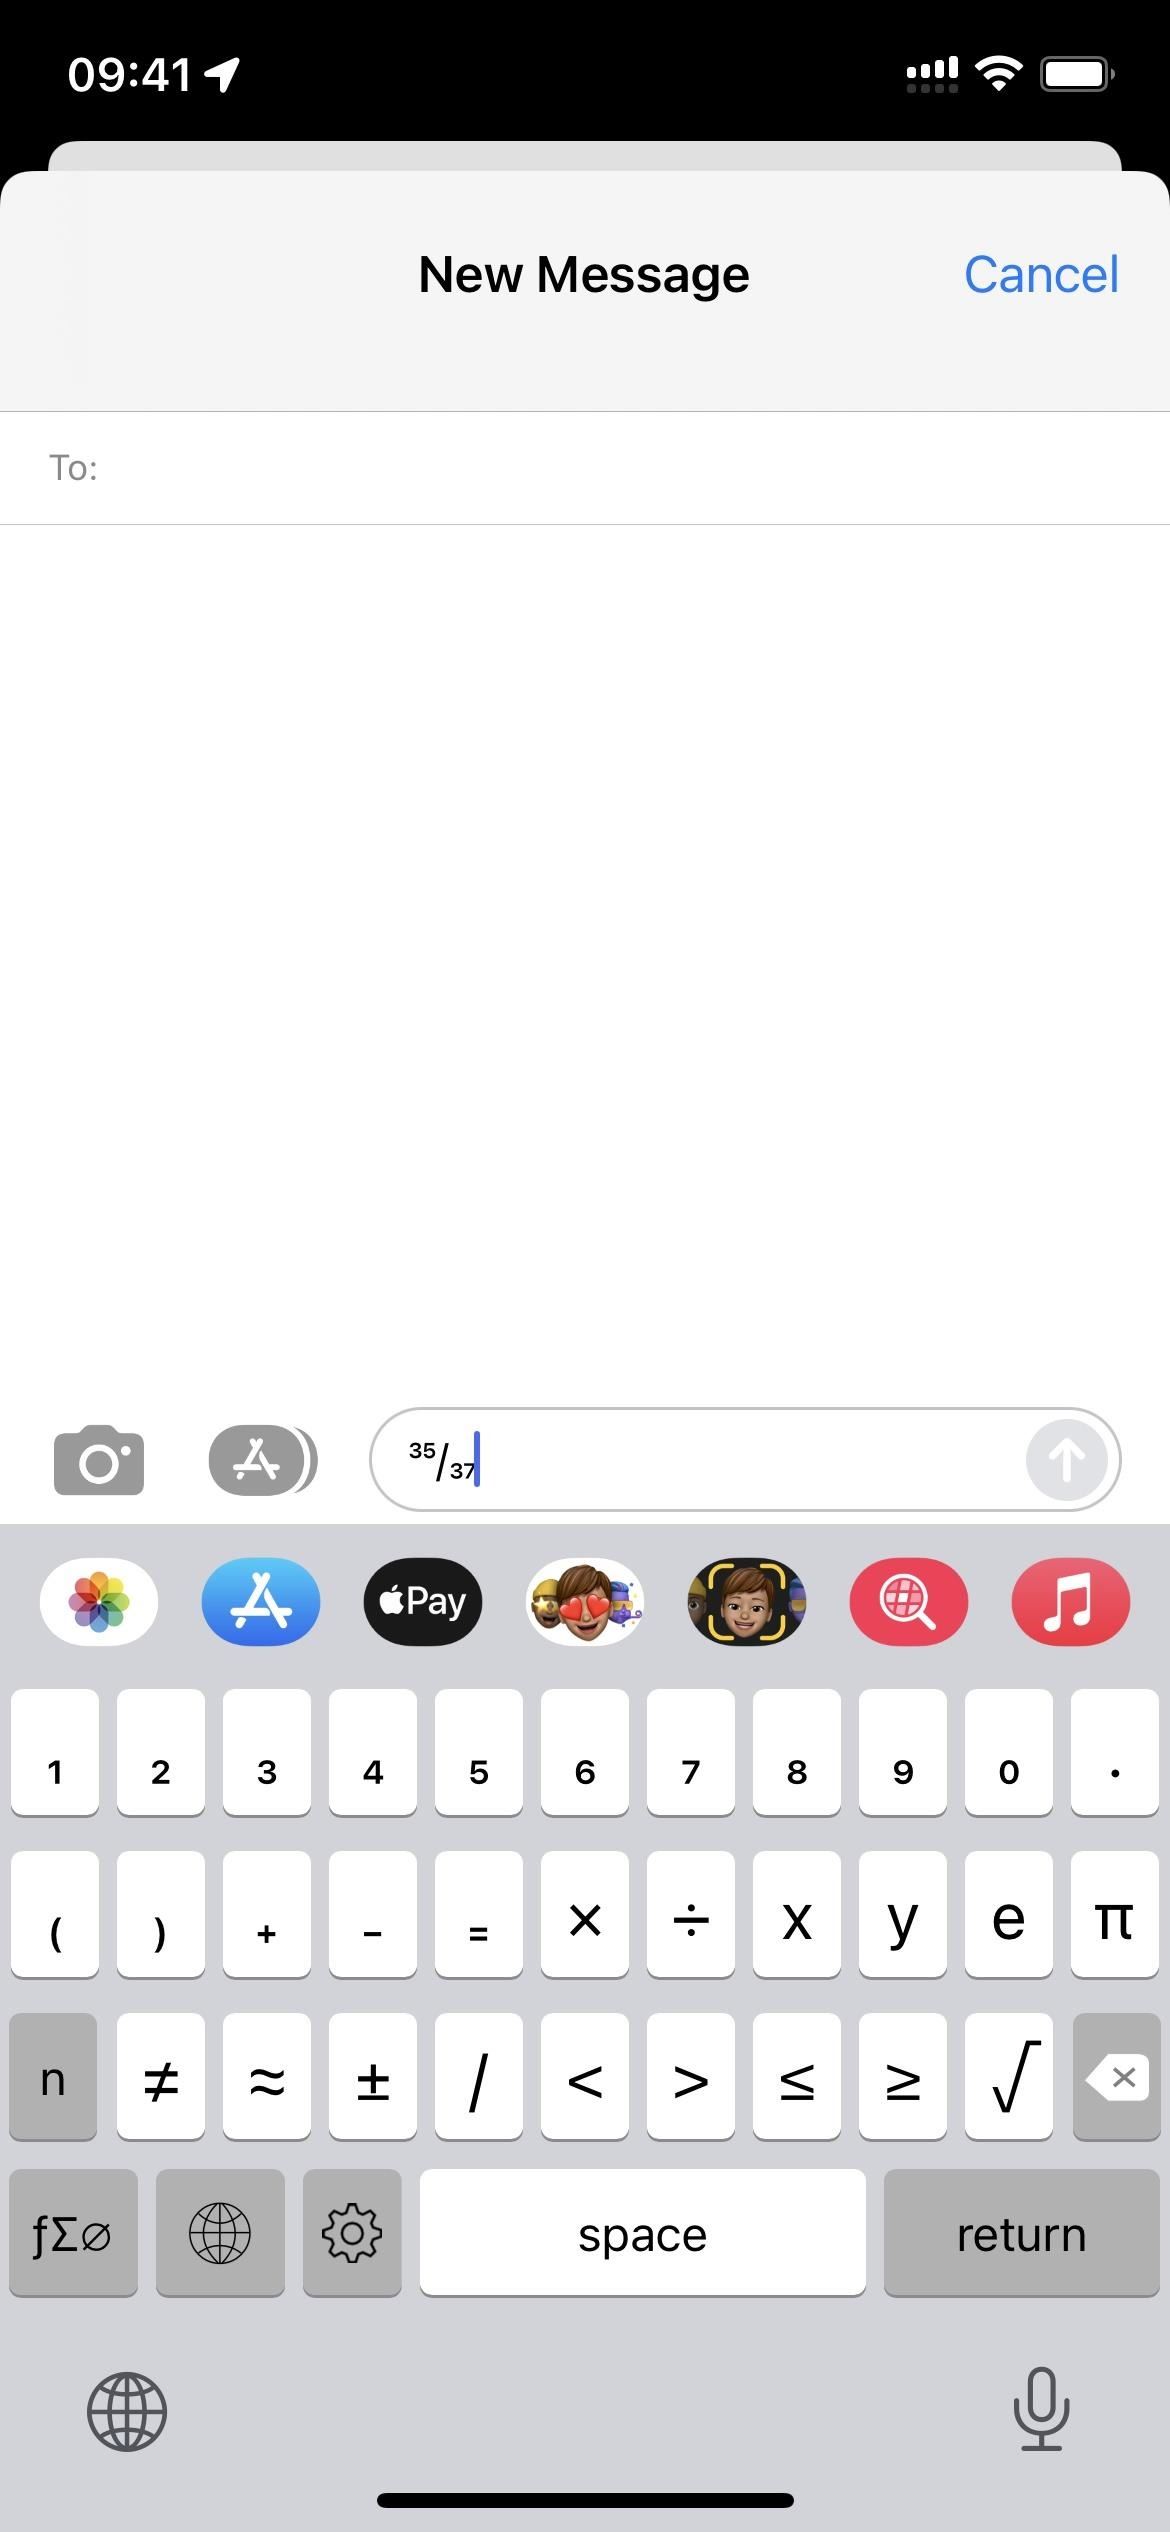 There's an Easy Way to Type Fractions as Single Characters on Your iPhone's Keyboard